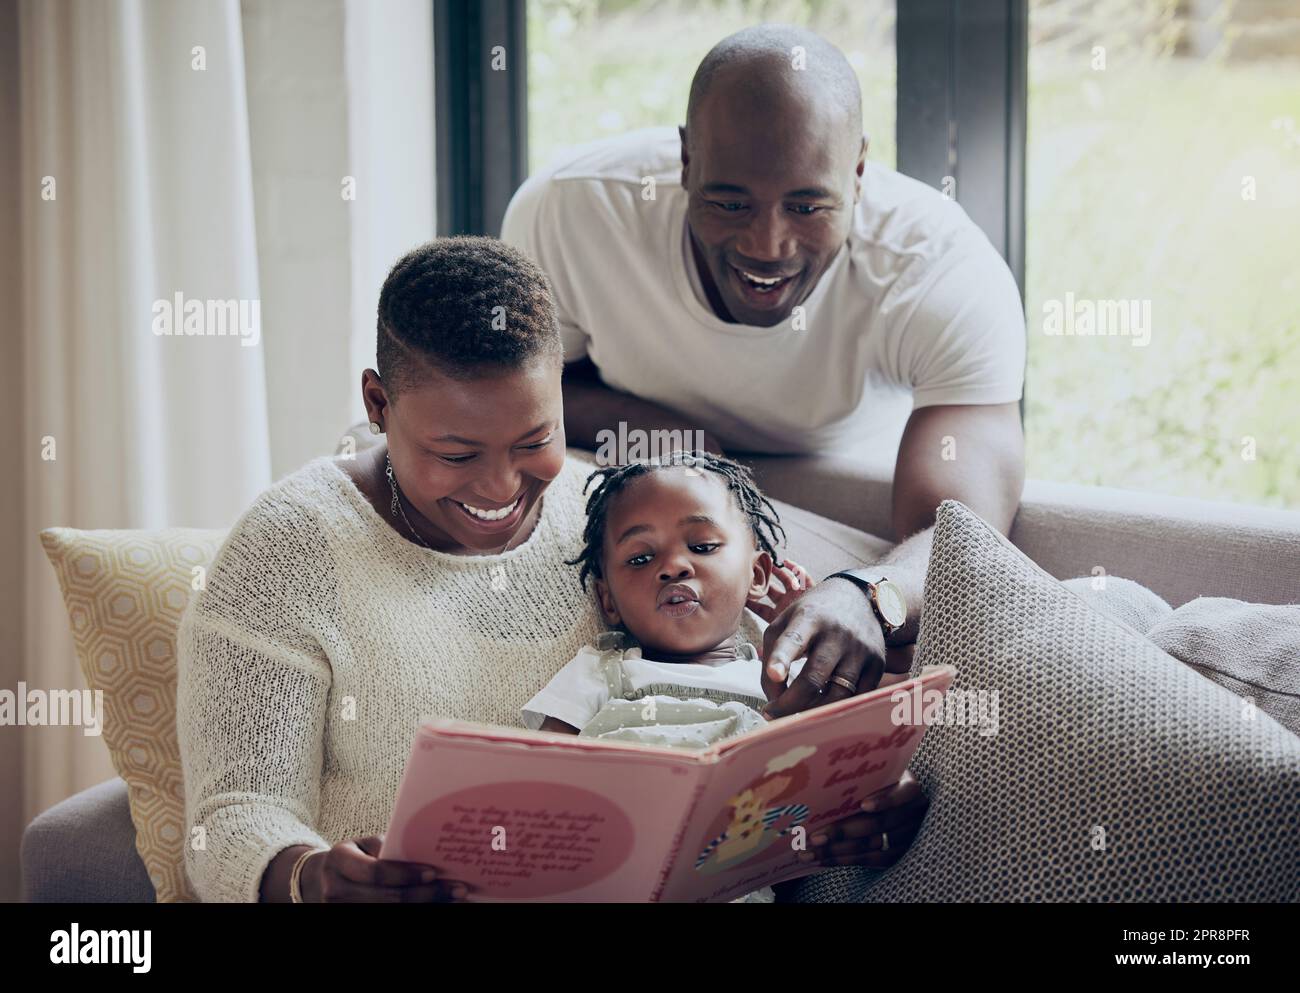 Reading it on her own. a young family reading a book together at home. Stock Photo